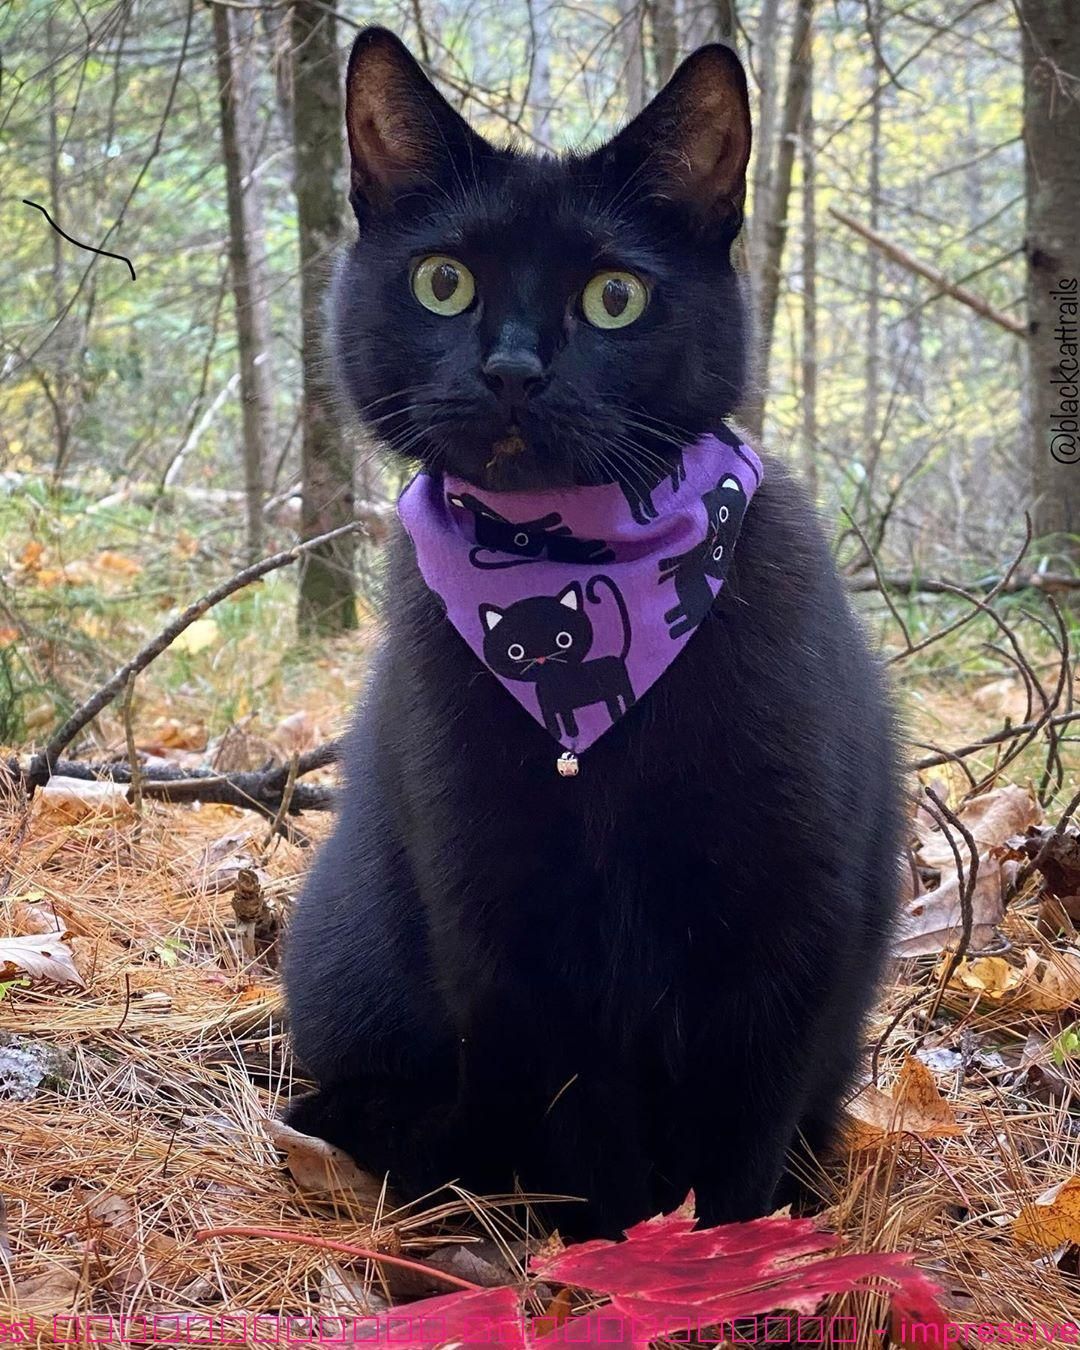 Satisfied Monday from Ledges! - impressive - FunnyCat -   19 diy Halloween Costumes cat ideas